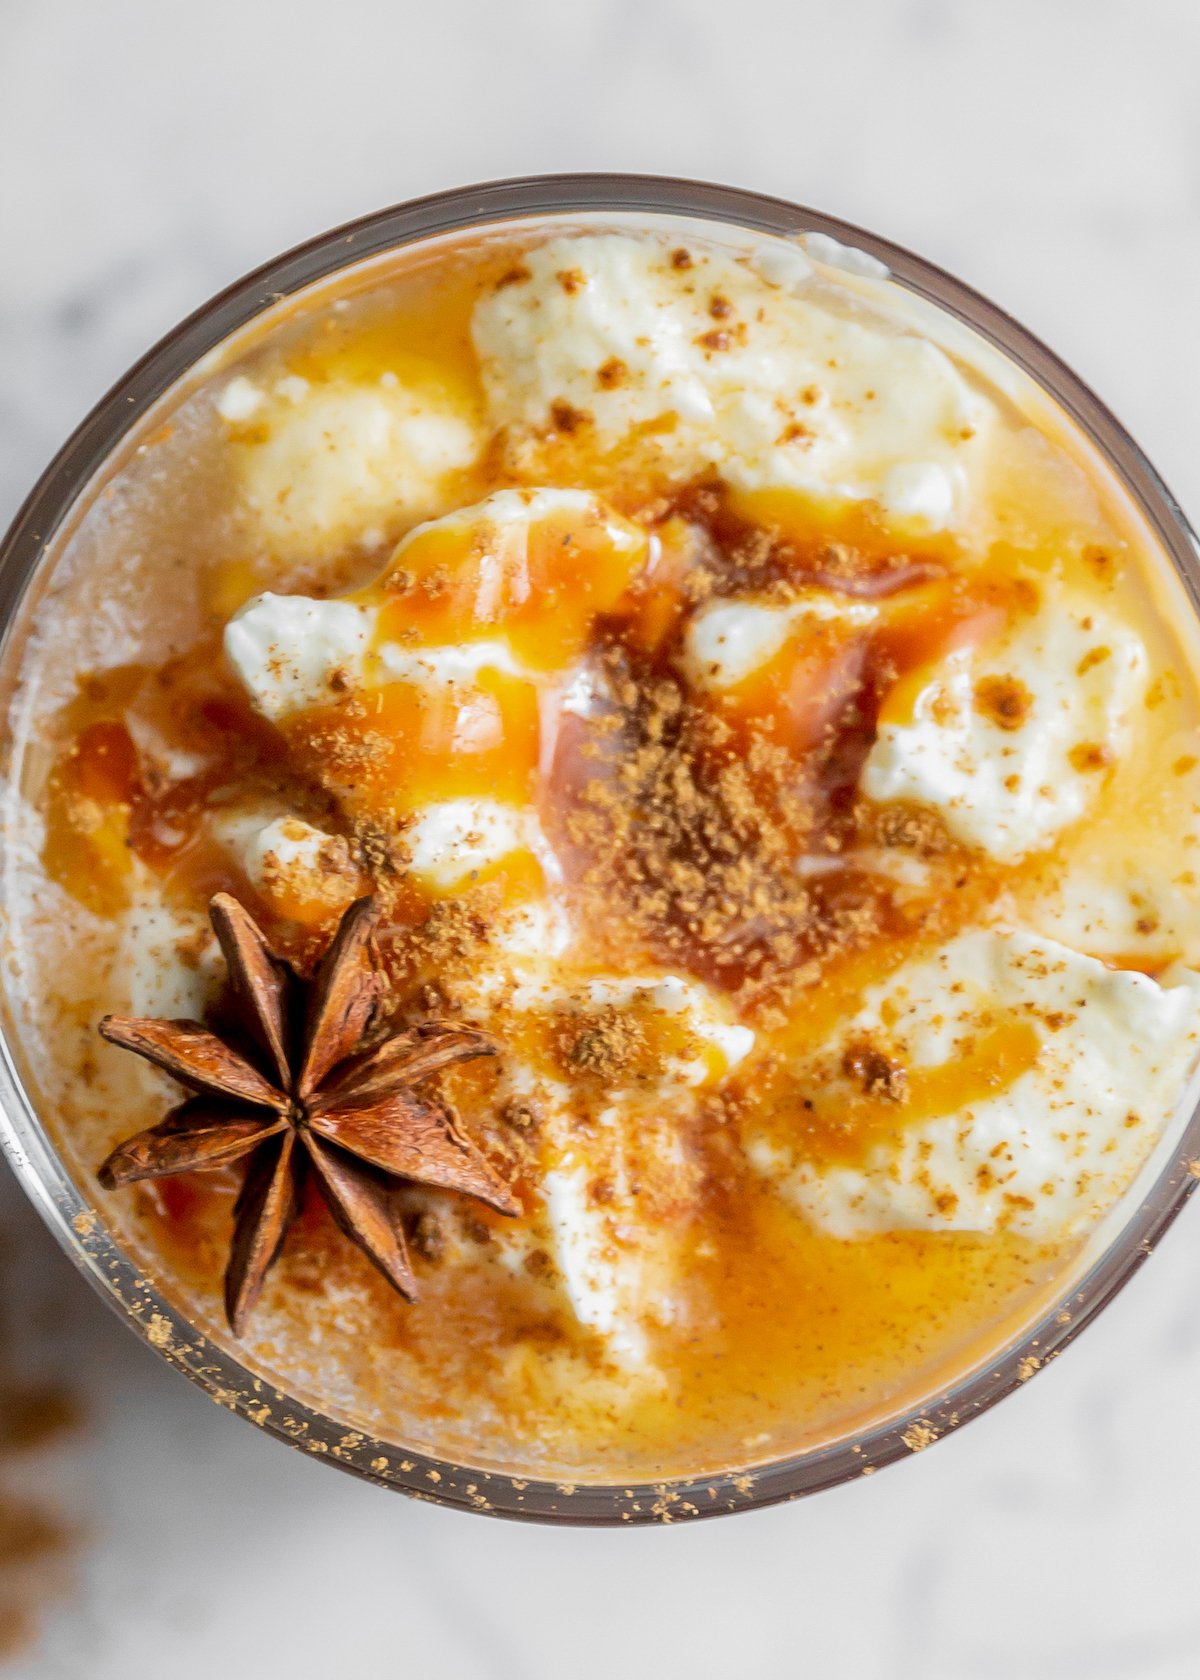 Pumpkin apple cider with caramel sauce and whipped cream.